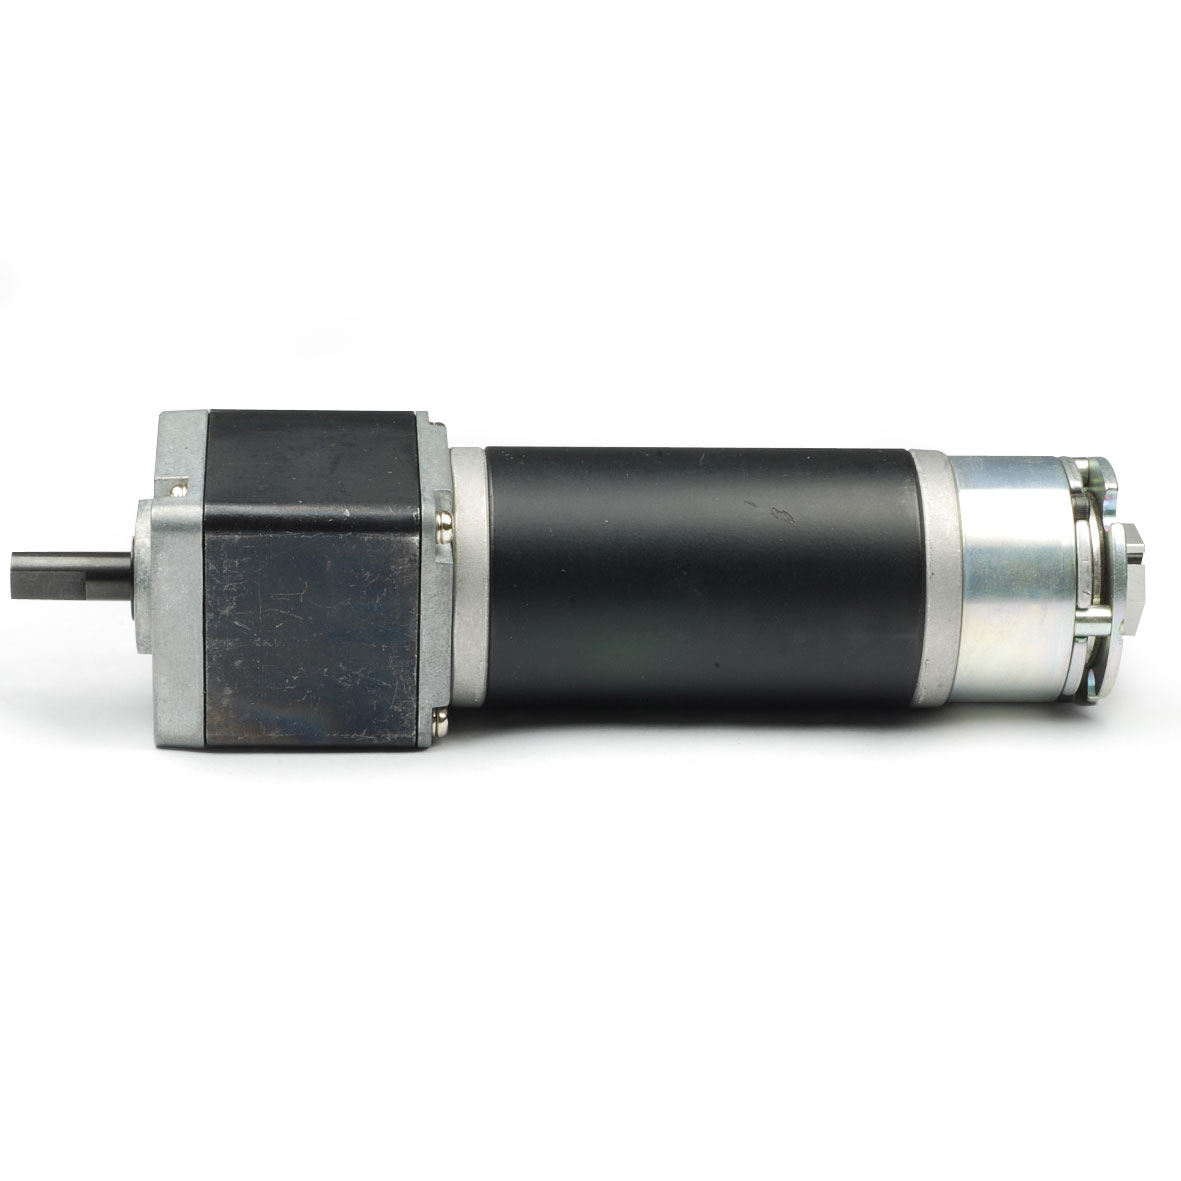 42.5mm DC Brushed Motor With Gearhead - 42.5mm high toque brushed gear motor